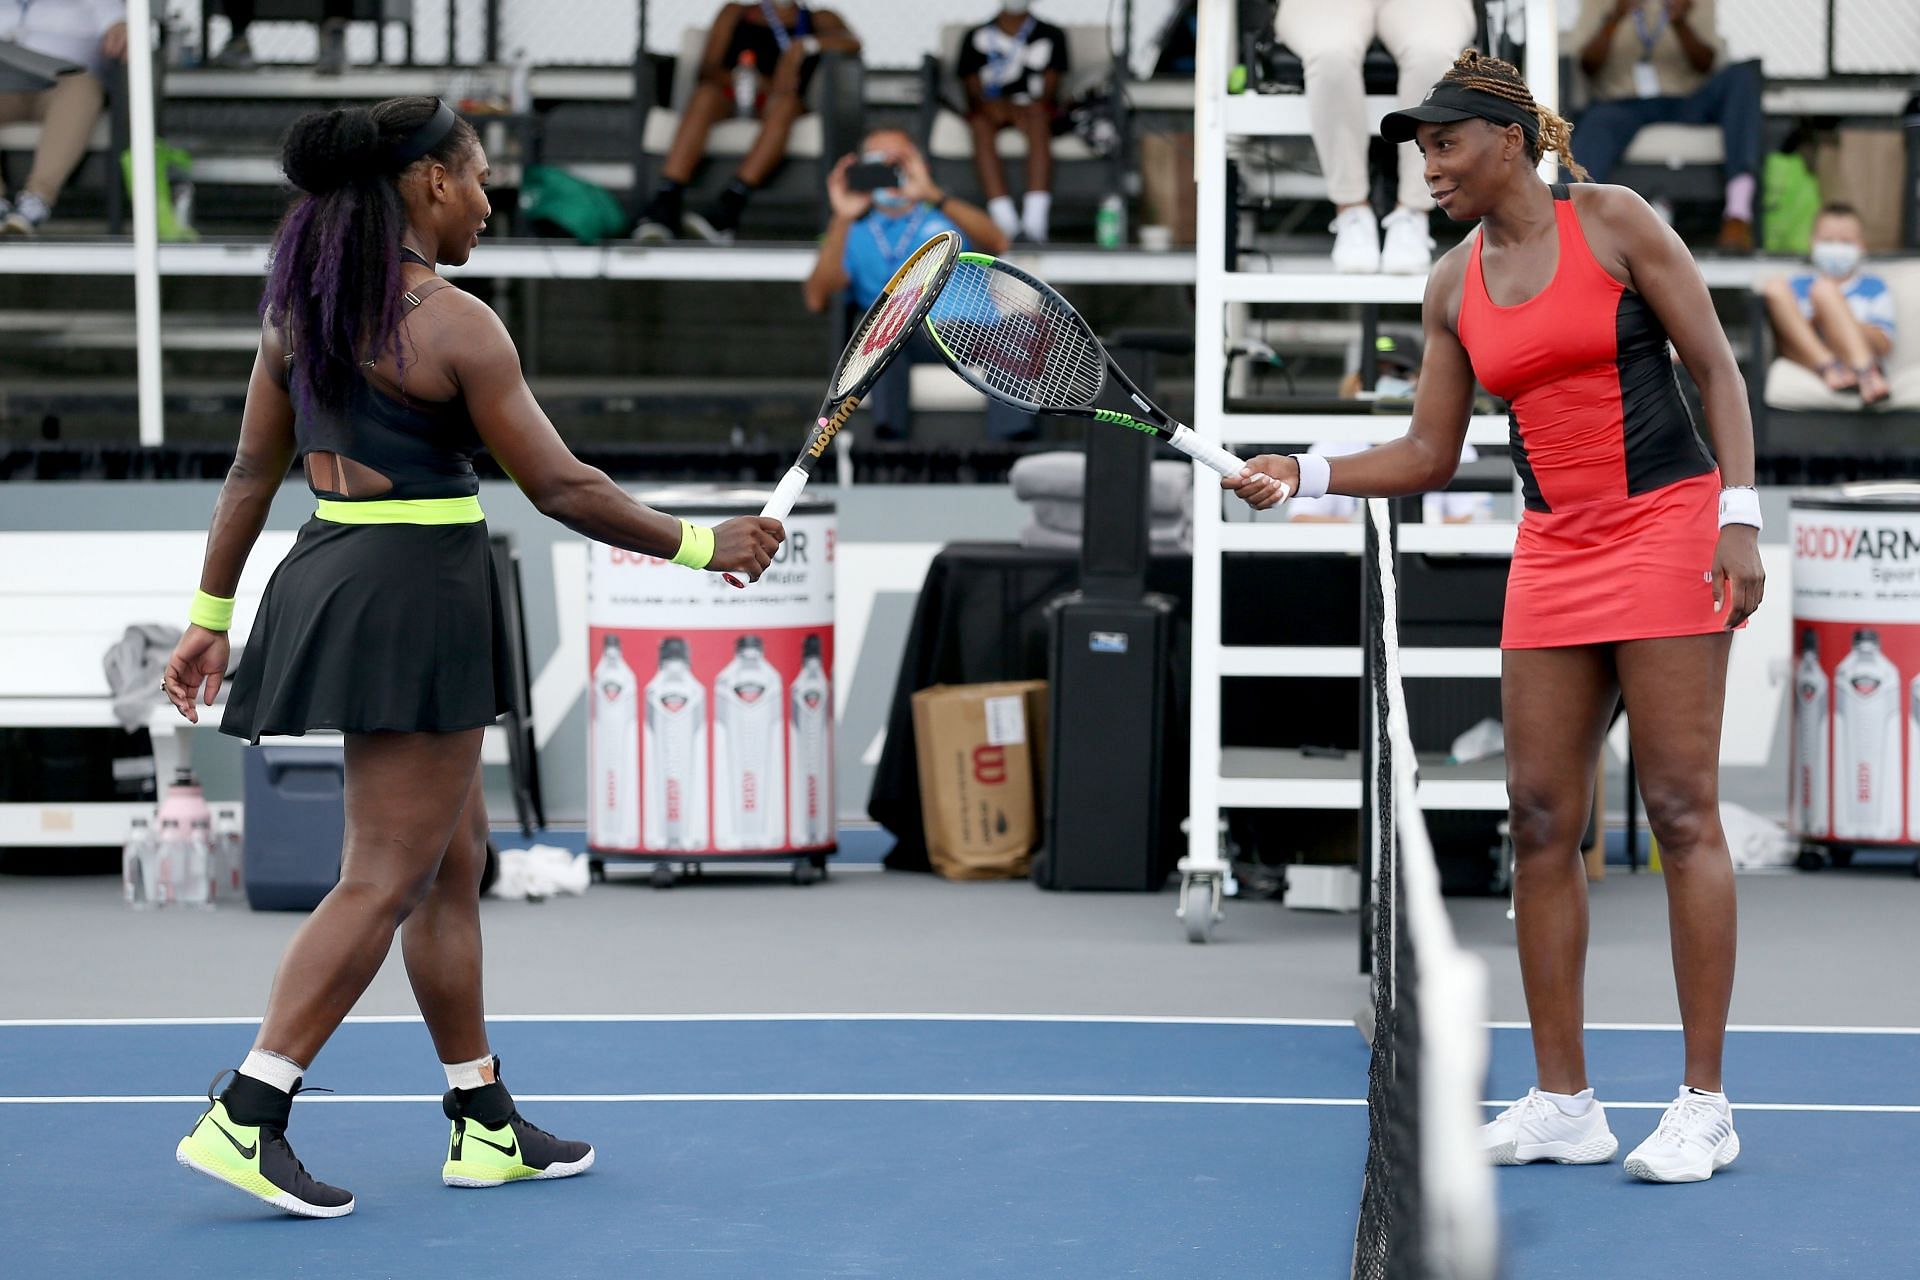 Serena Williams and Venus Williams have dominated tennis for more than two decades